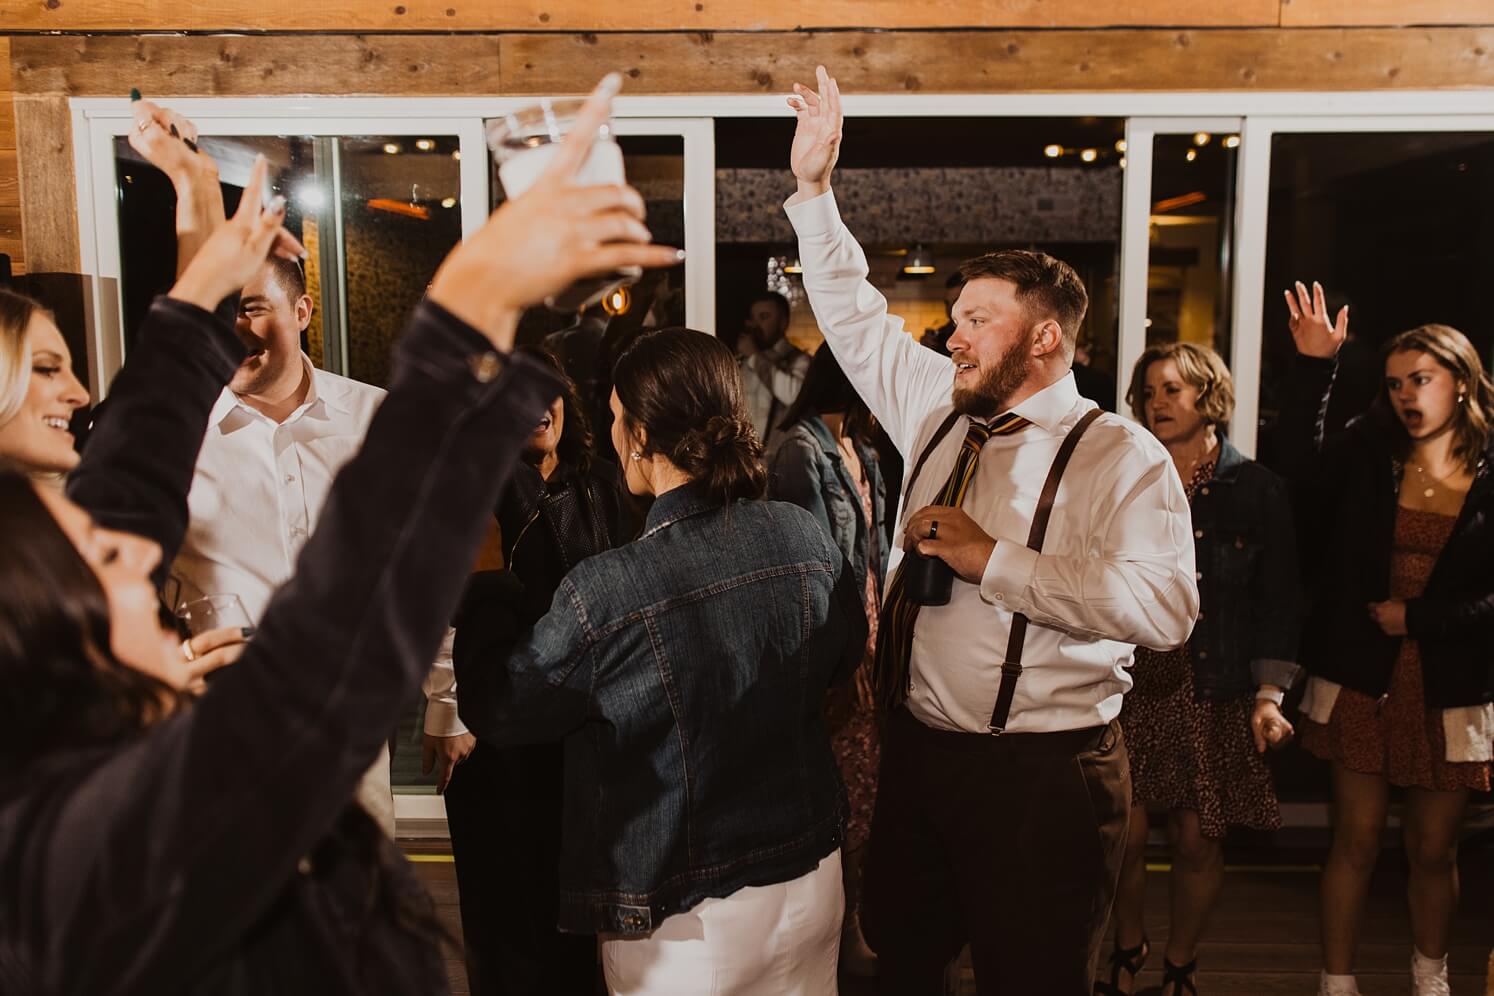 Bride and groom dancing at wedding reception at Evergreen wedding venue | McArthur Weddings and Events